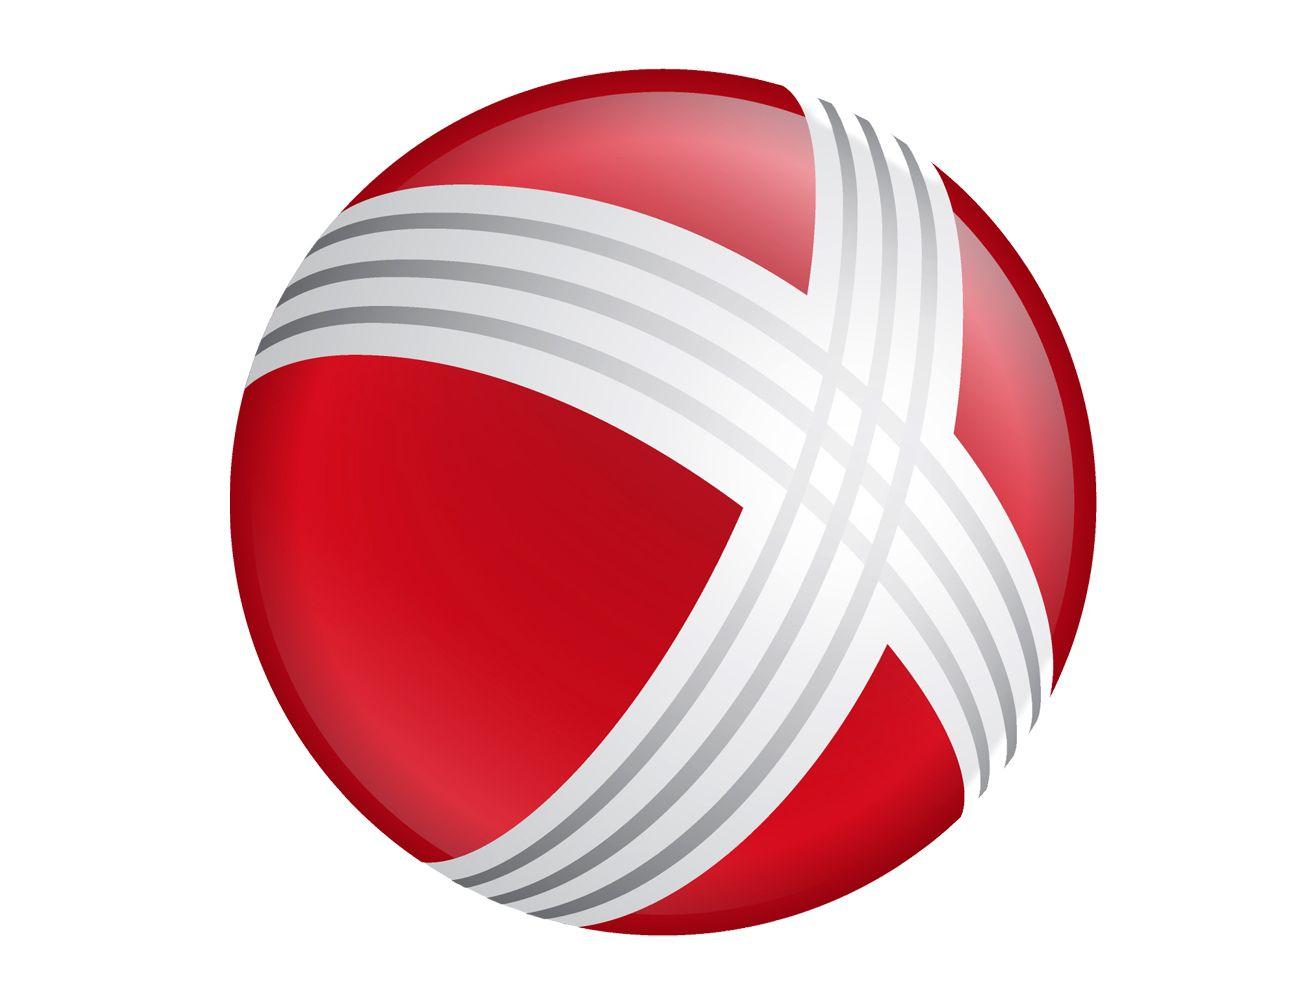 White and Red X Logo - Xerox Logo, Xerox Symbol, Meaning, History and Evolution